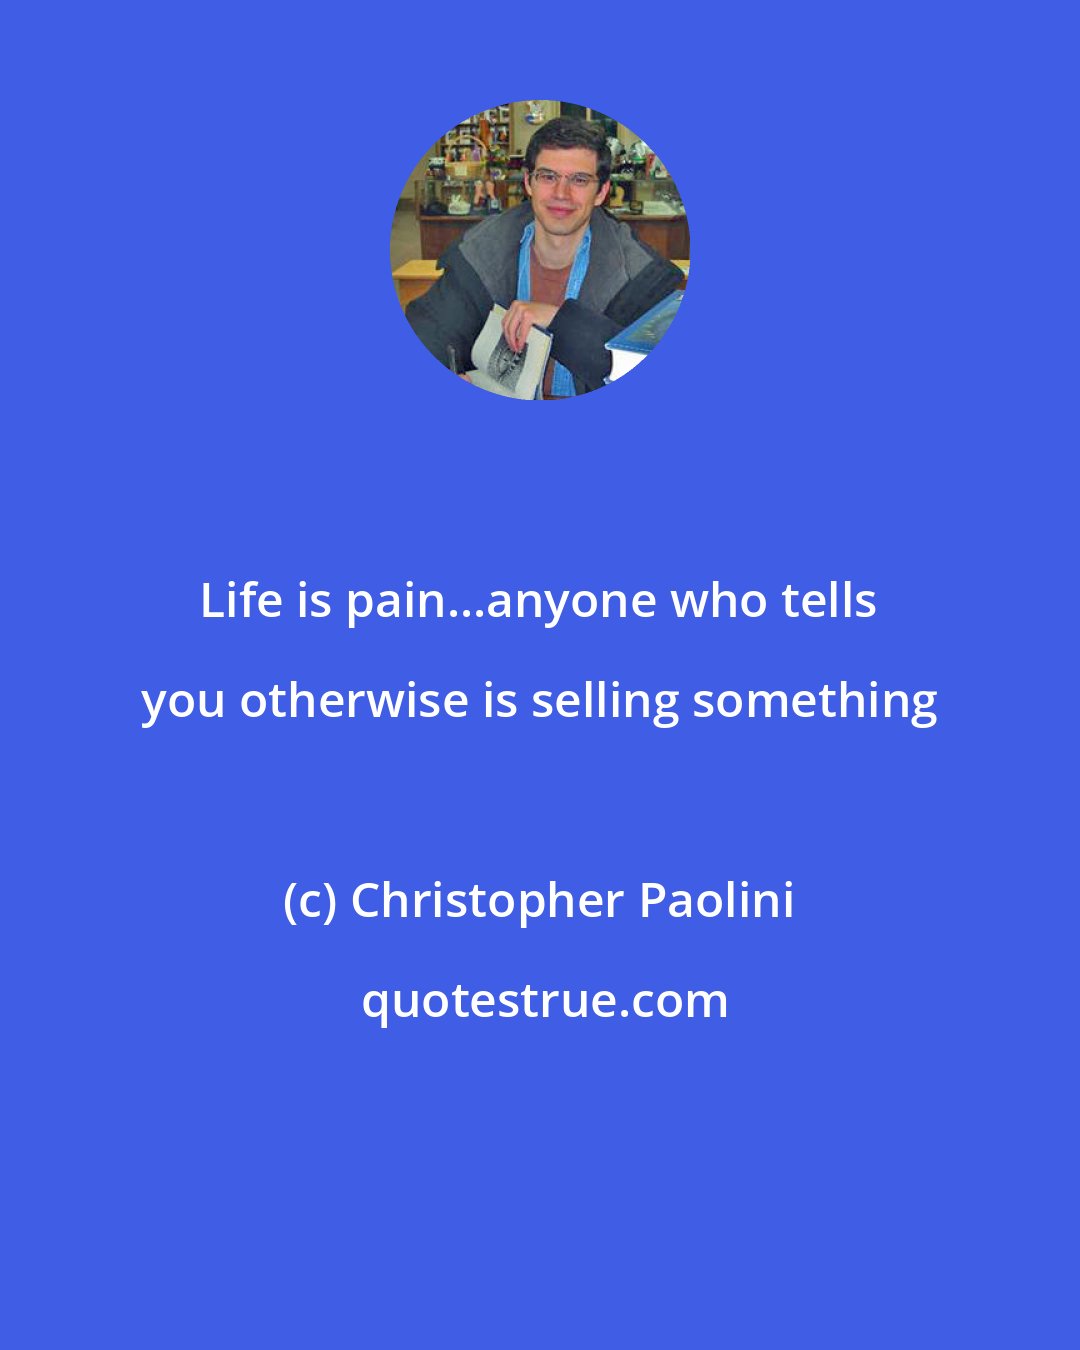 Christopher Paolini: Life is pain...anyone who tells you otherwise is selling something